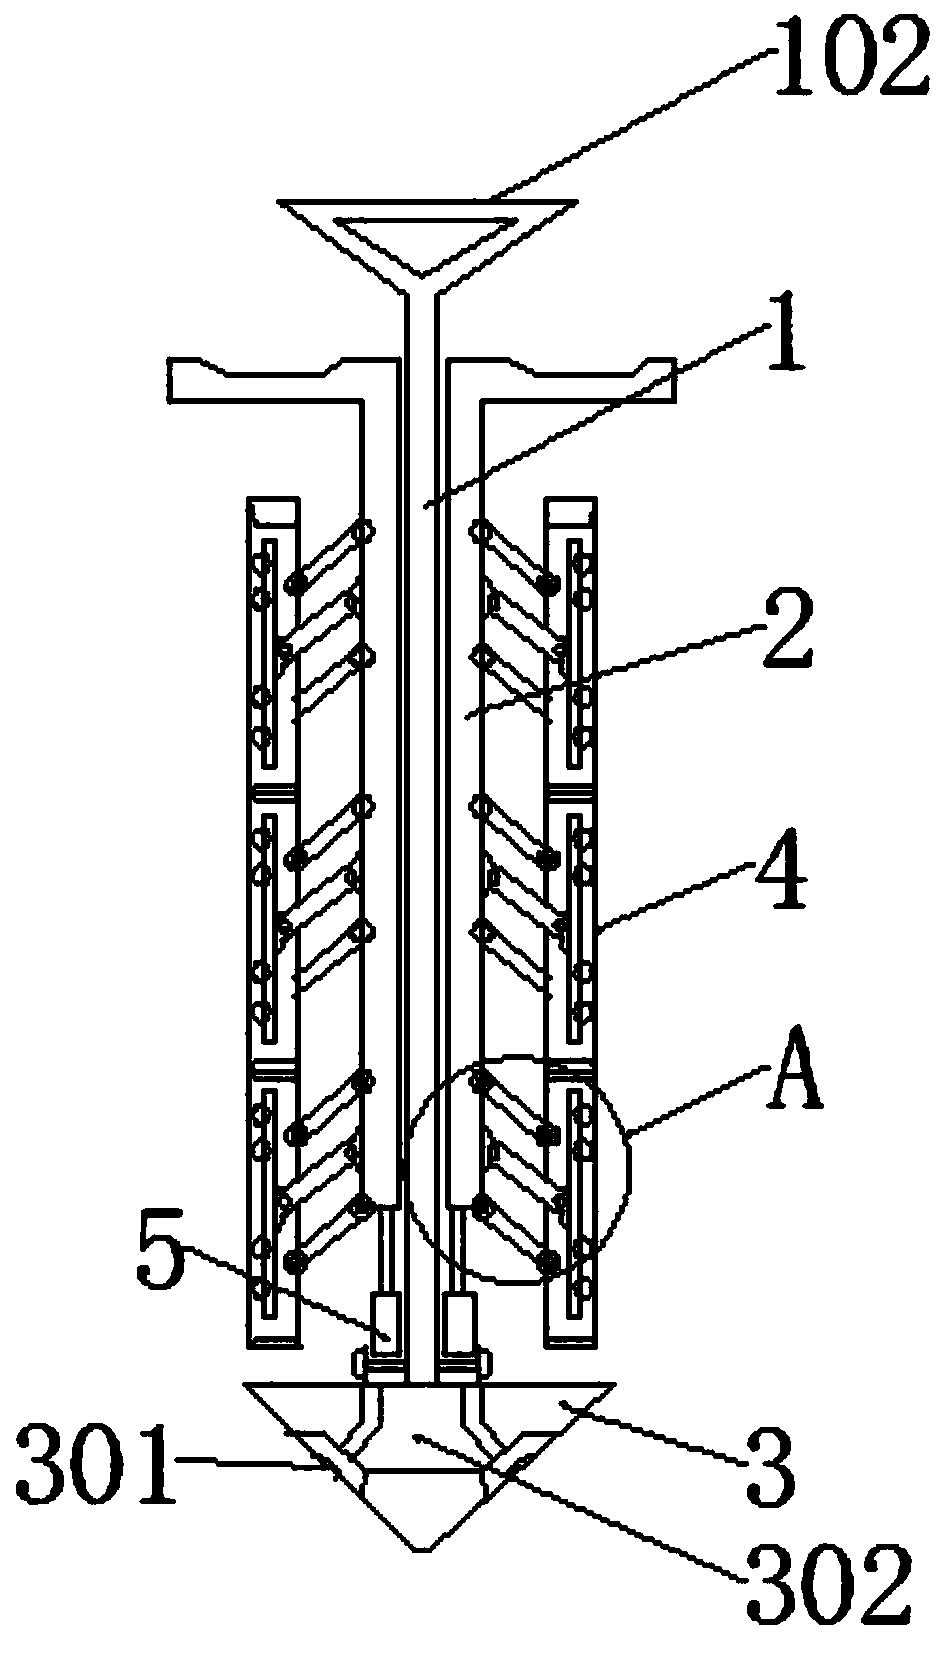 Soil loosening device for potted plant transplanting